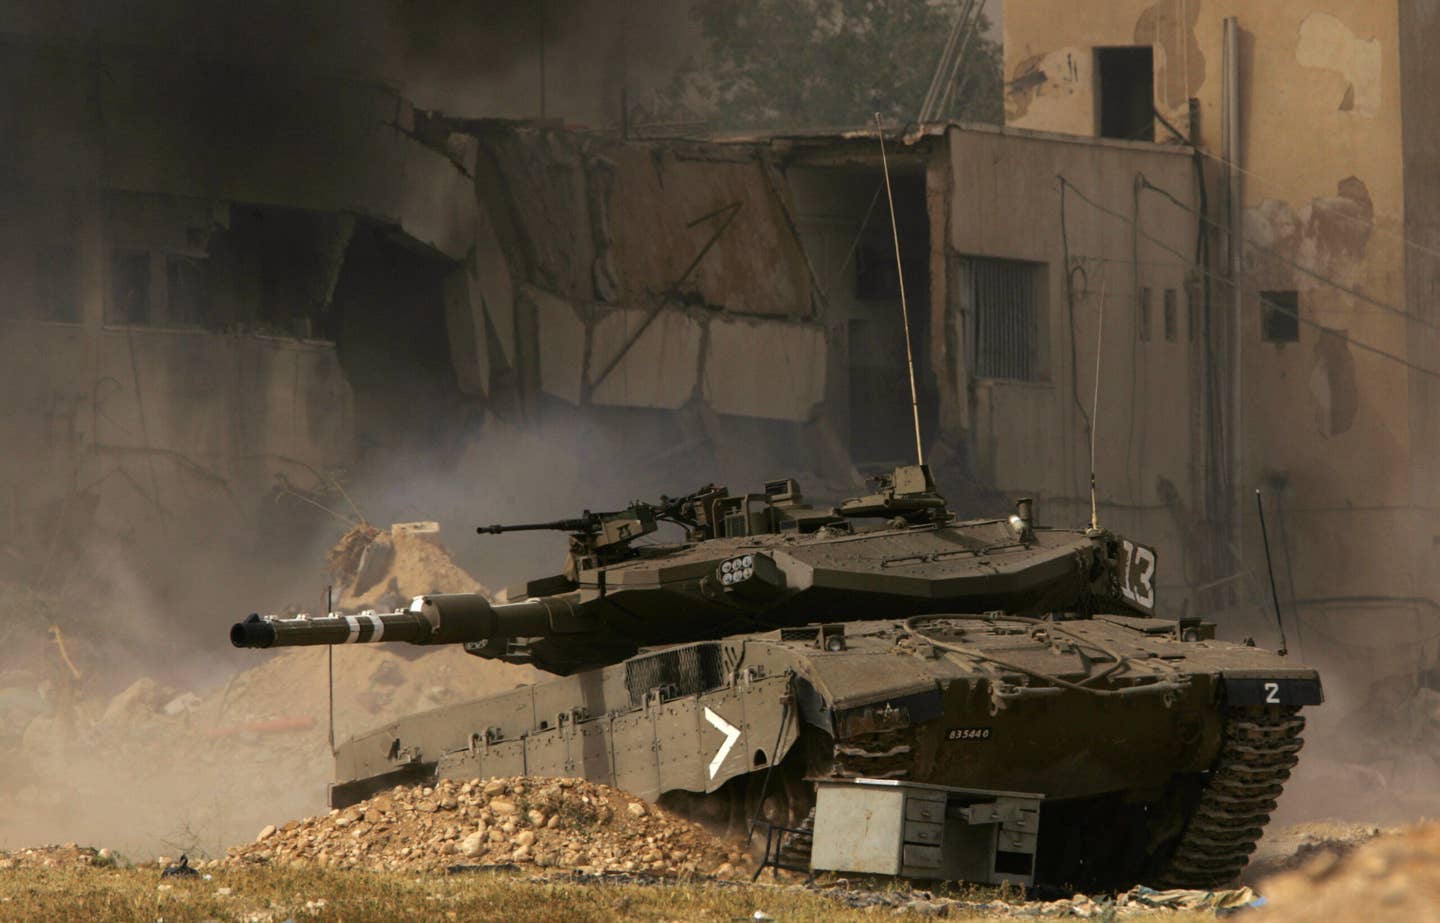 Israeli tank rolls into position as the Palestinian jail compound is stormed by Israeli troops in the West Bank town of Jericho, March 14, 2006. (Photo credit should read SAMUEL ARANDA/AFP via Getty Images)